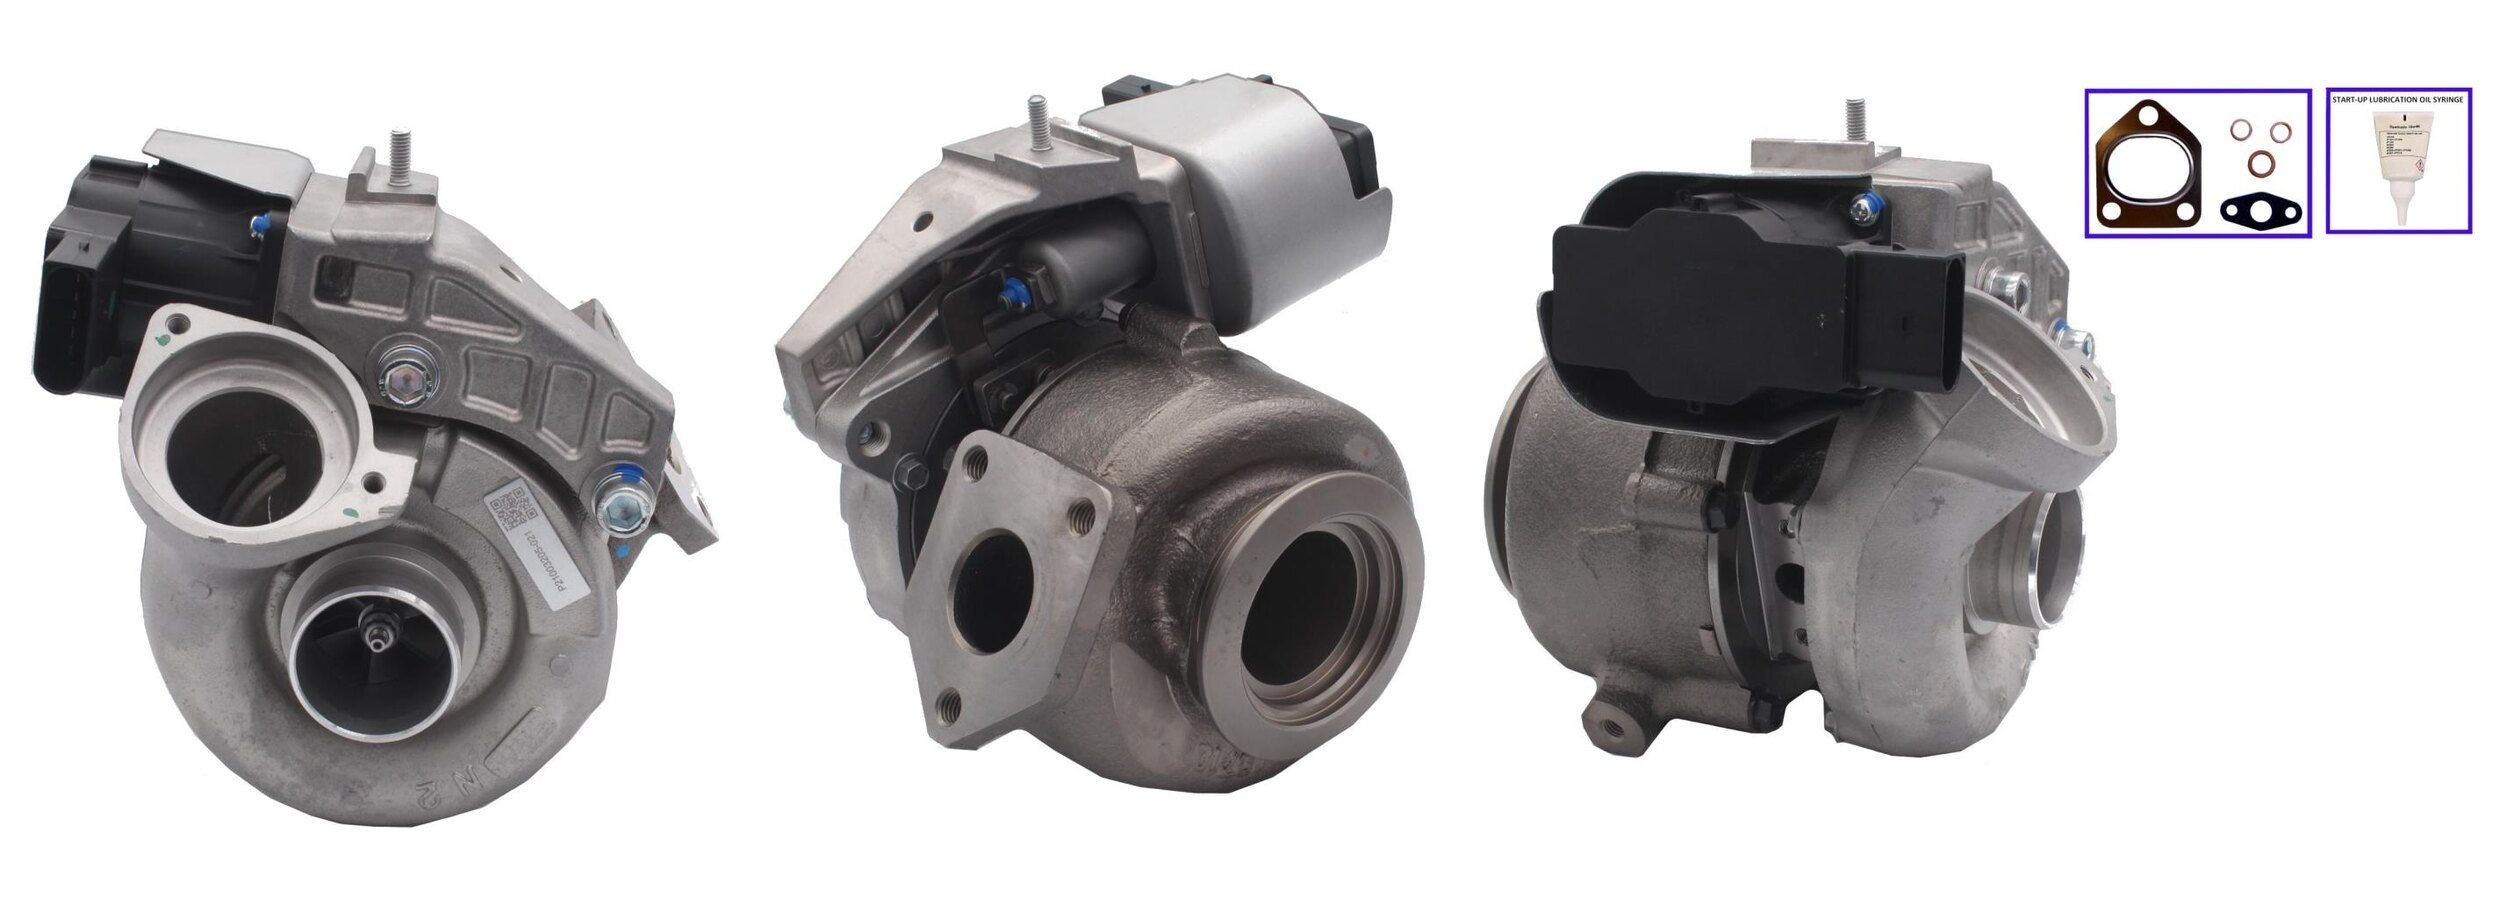 TURBO MOTOR PA4913505670 Turbocharger Exhaust Turbocharger, Electrically controlled actuator, with gaskets/seals